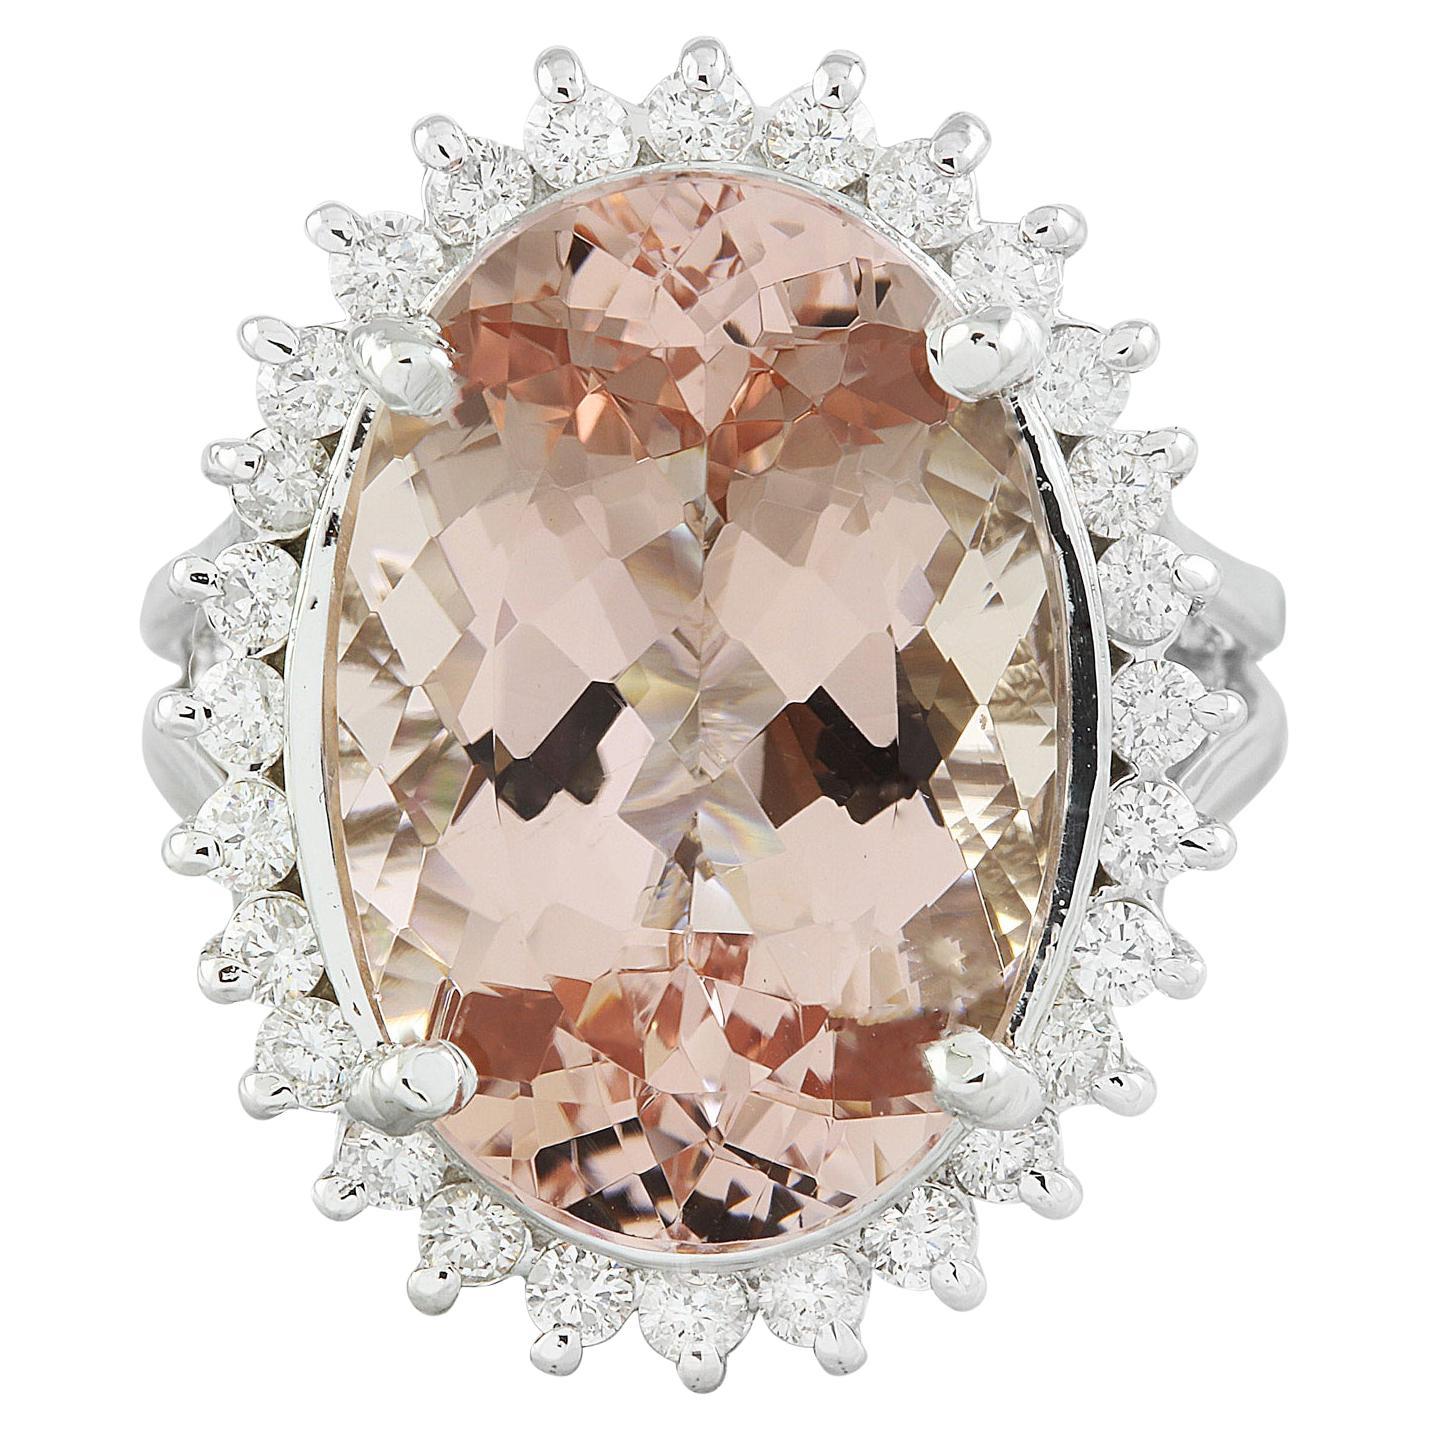 Luxurious Natural Morganite Diamond Ring in 14K Solid White Gold